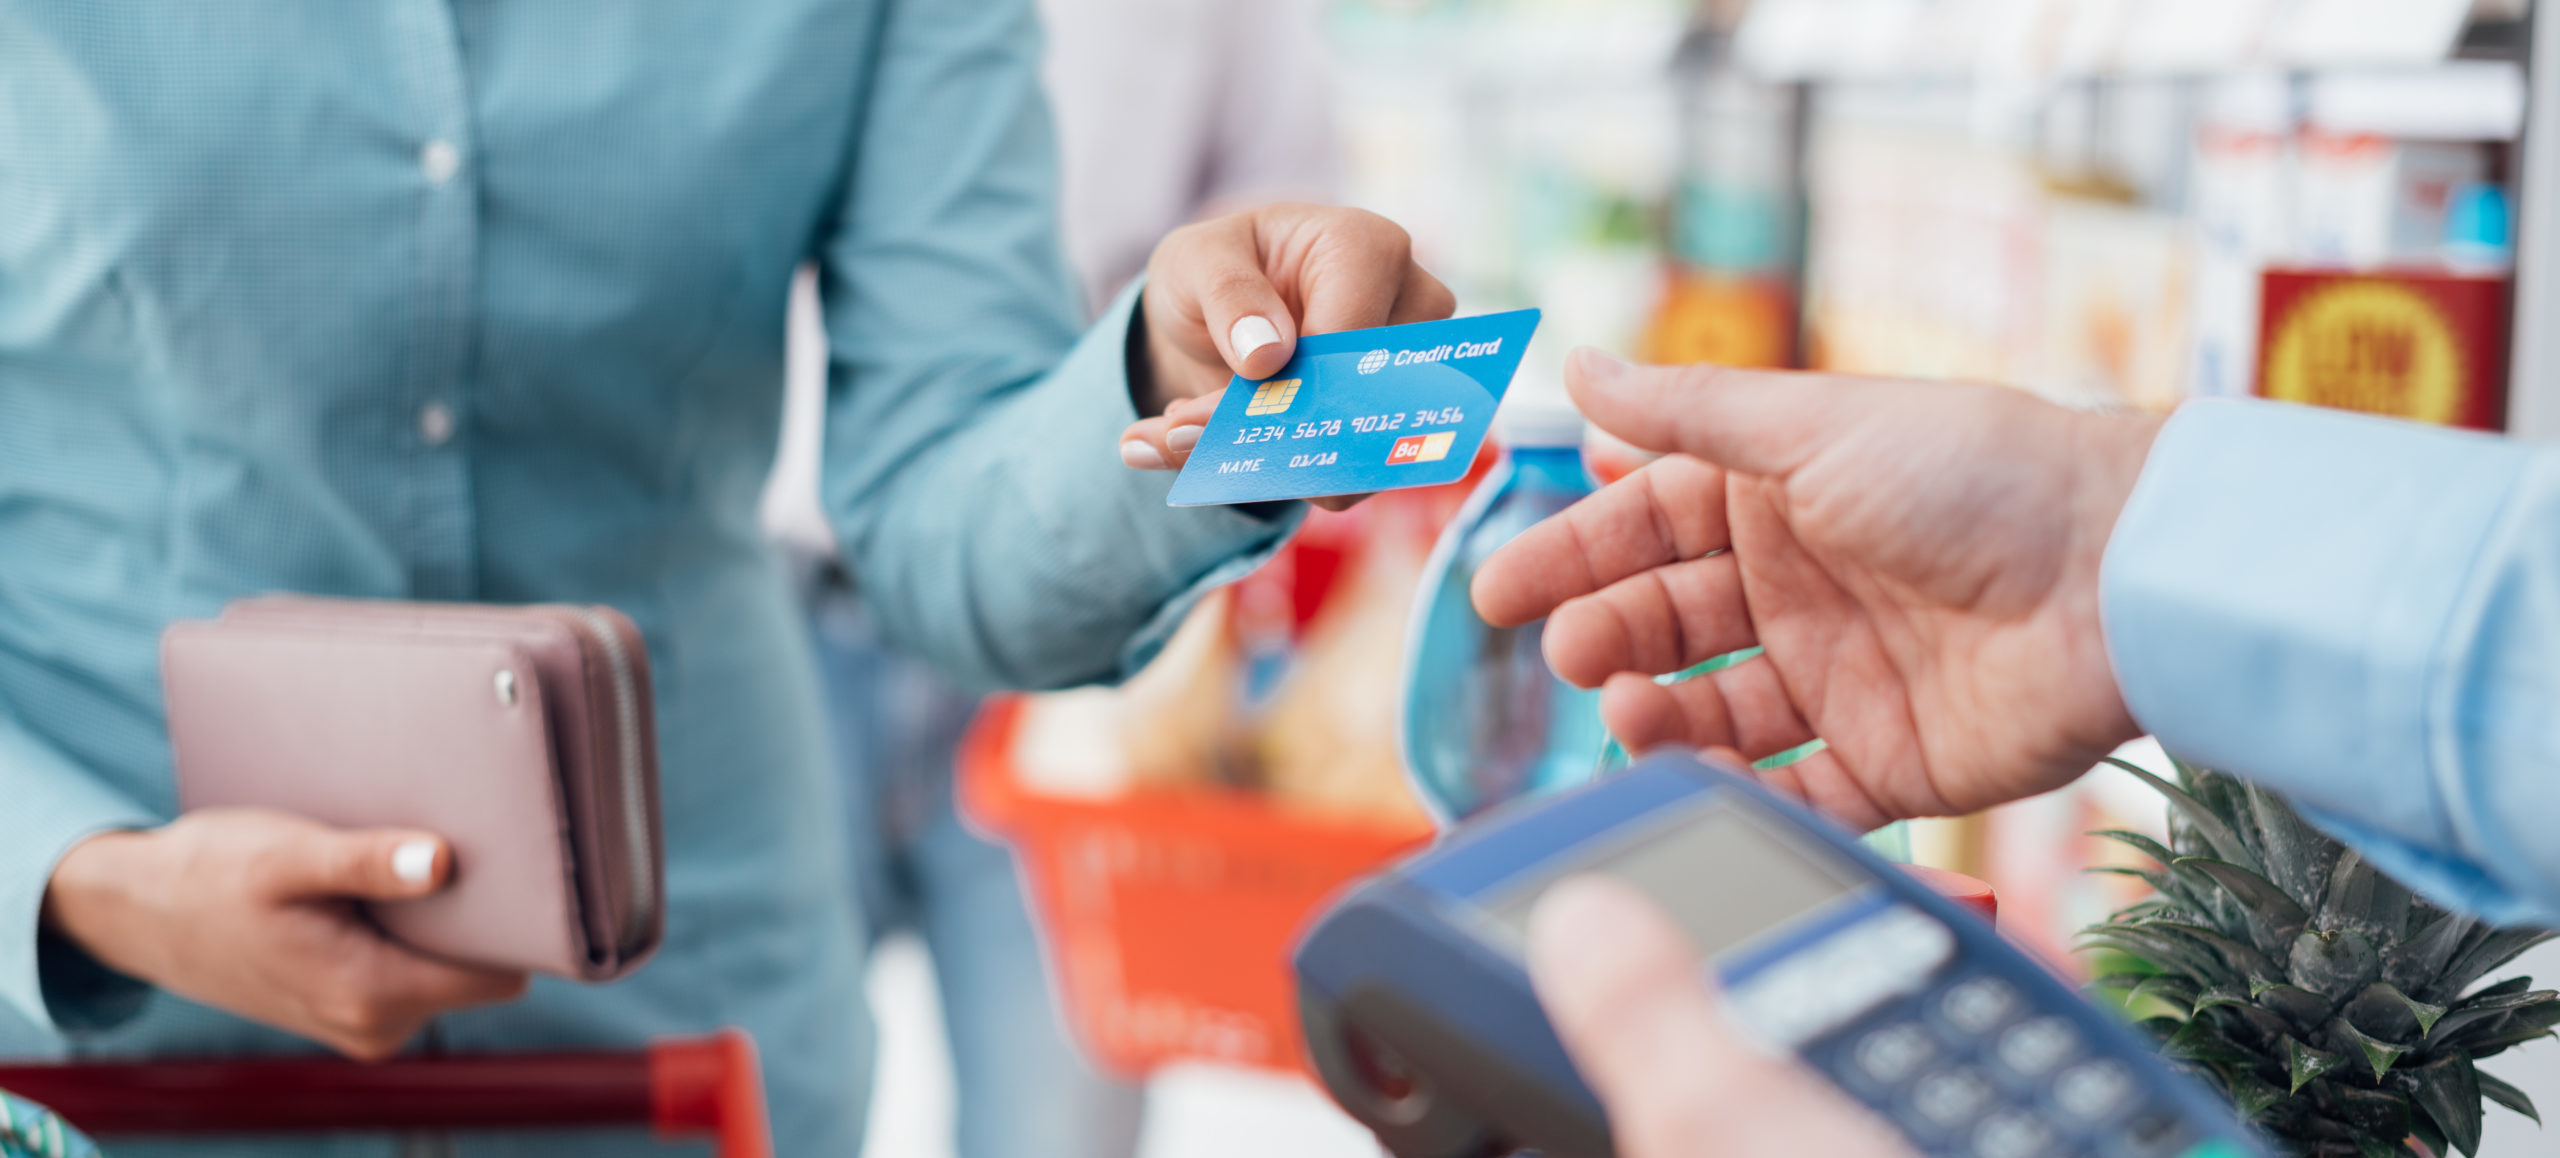 Best credit card for groceries